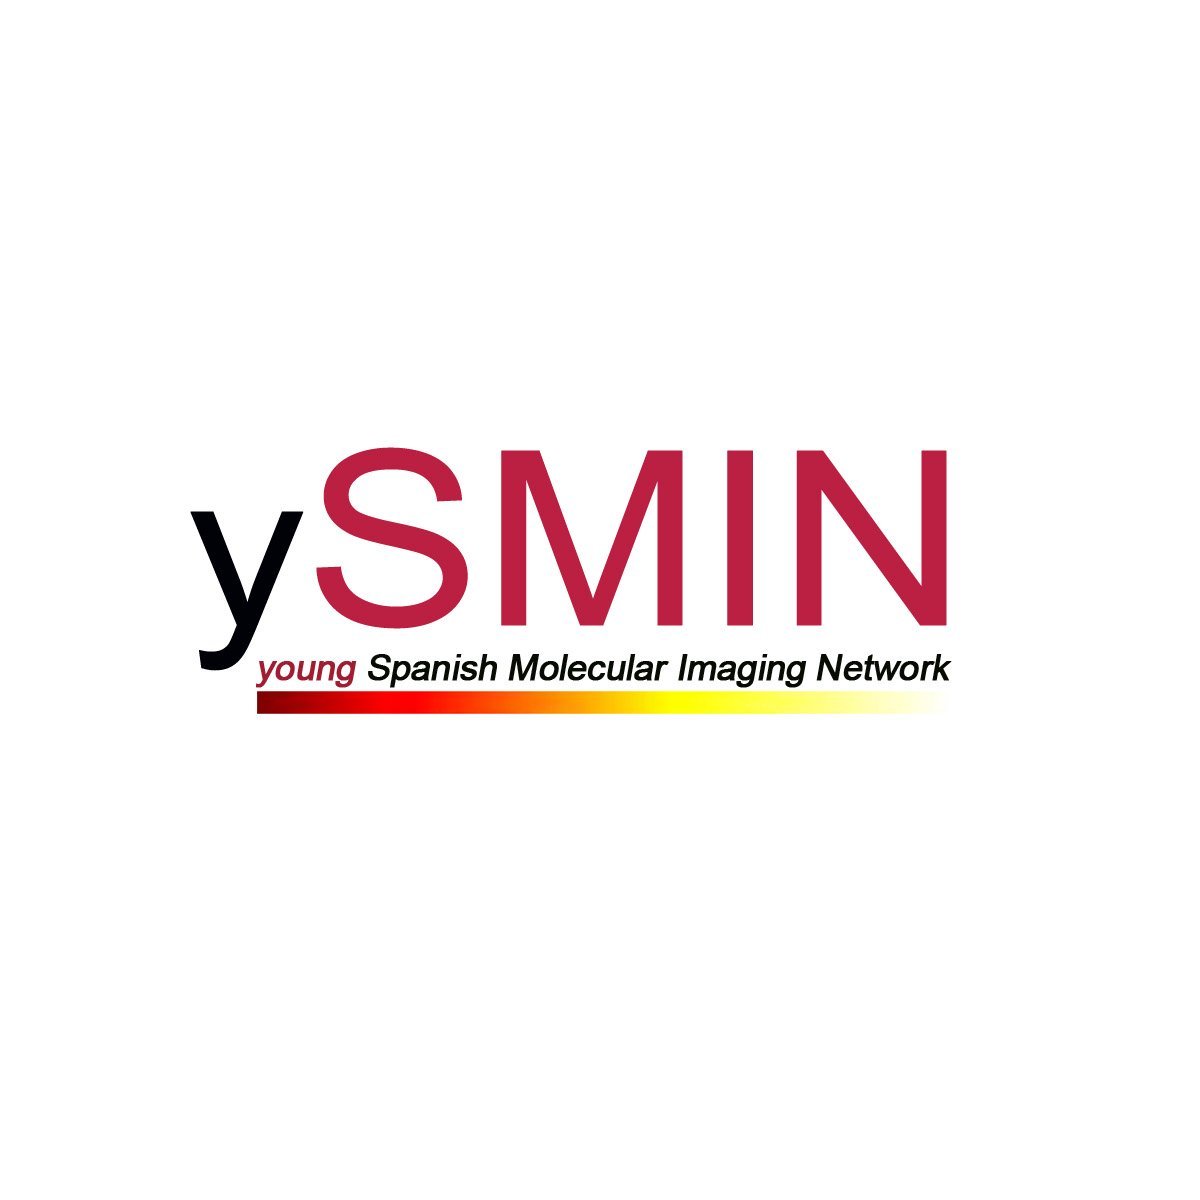 We are the young Spanish molecular imaging network (youngSMIN): a pioneering imaging science community in Spain in molecular imaging.